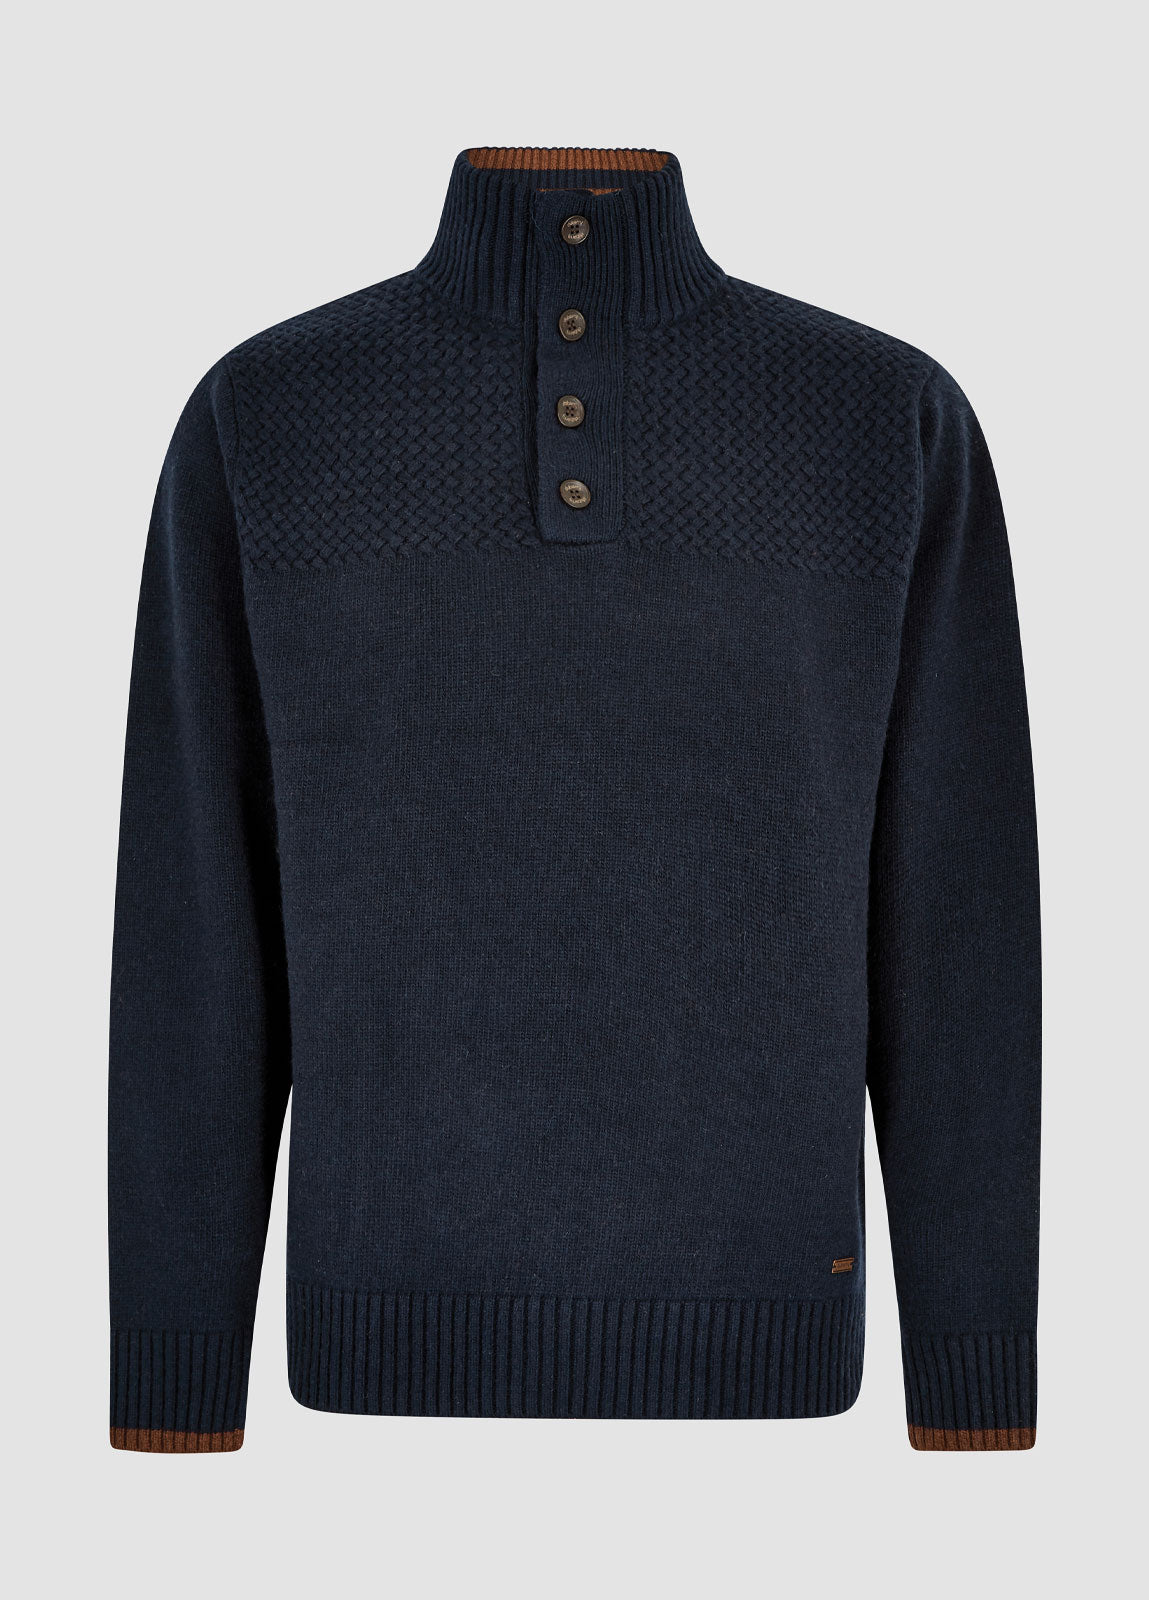 Roundwood Knitted Sweater - Navy